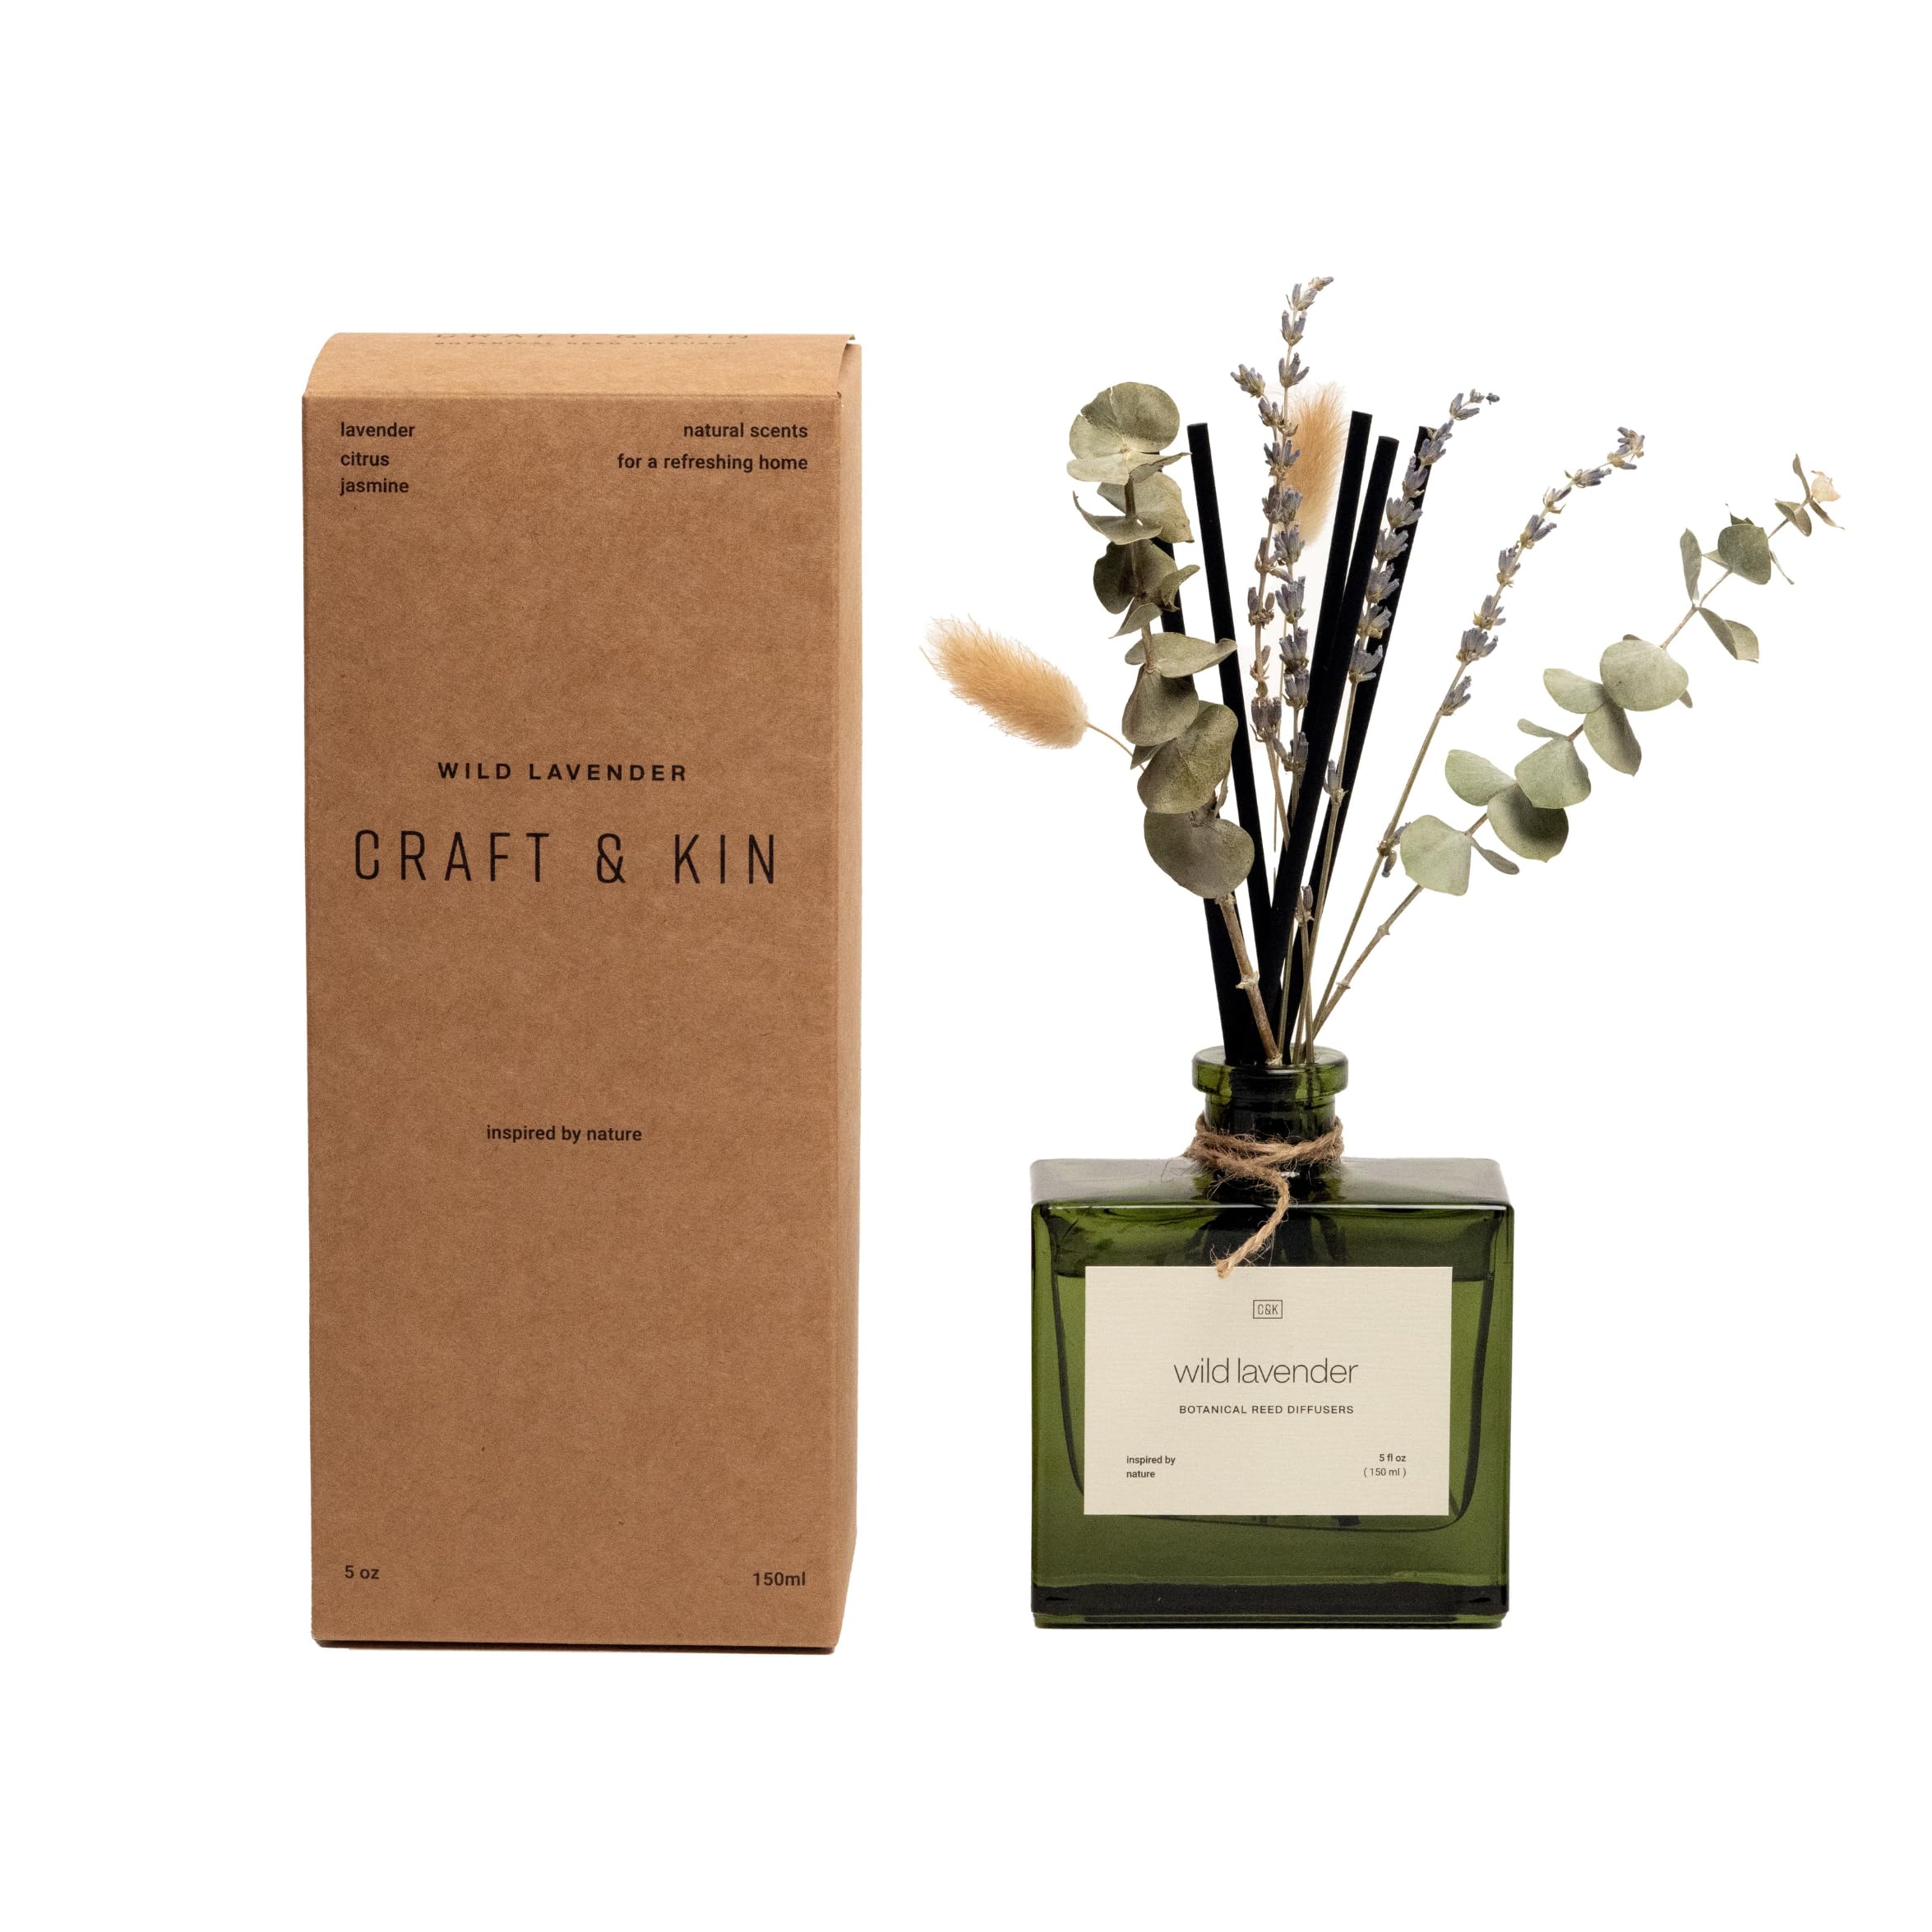 Craft & Kin Reed Diffuser Set with Dried Flowers